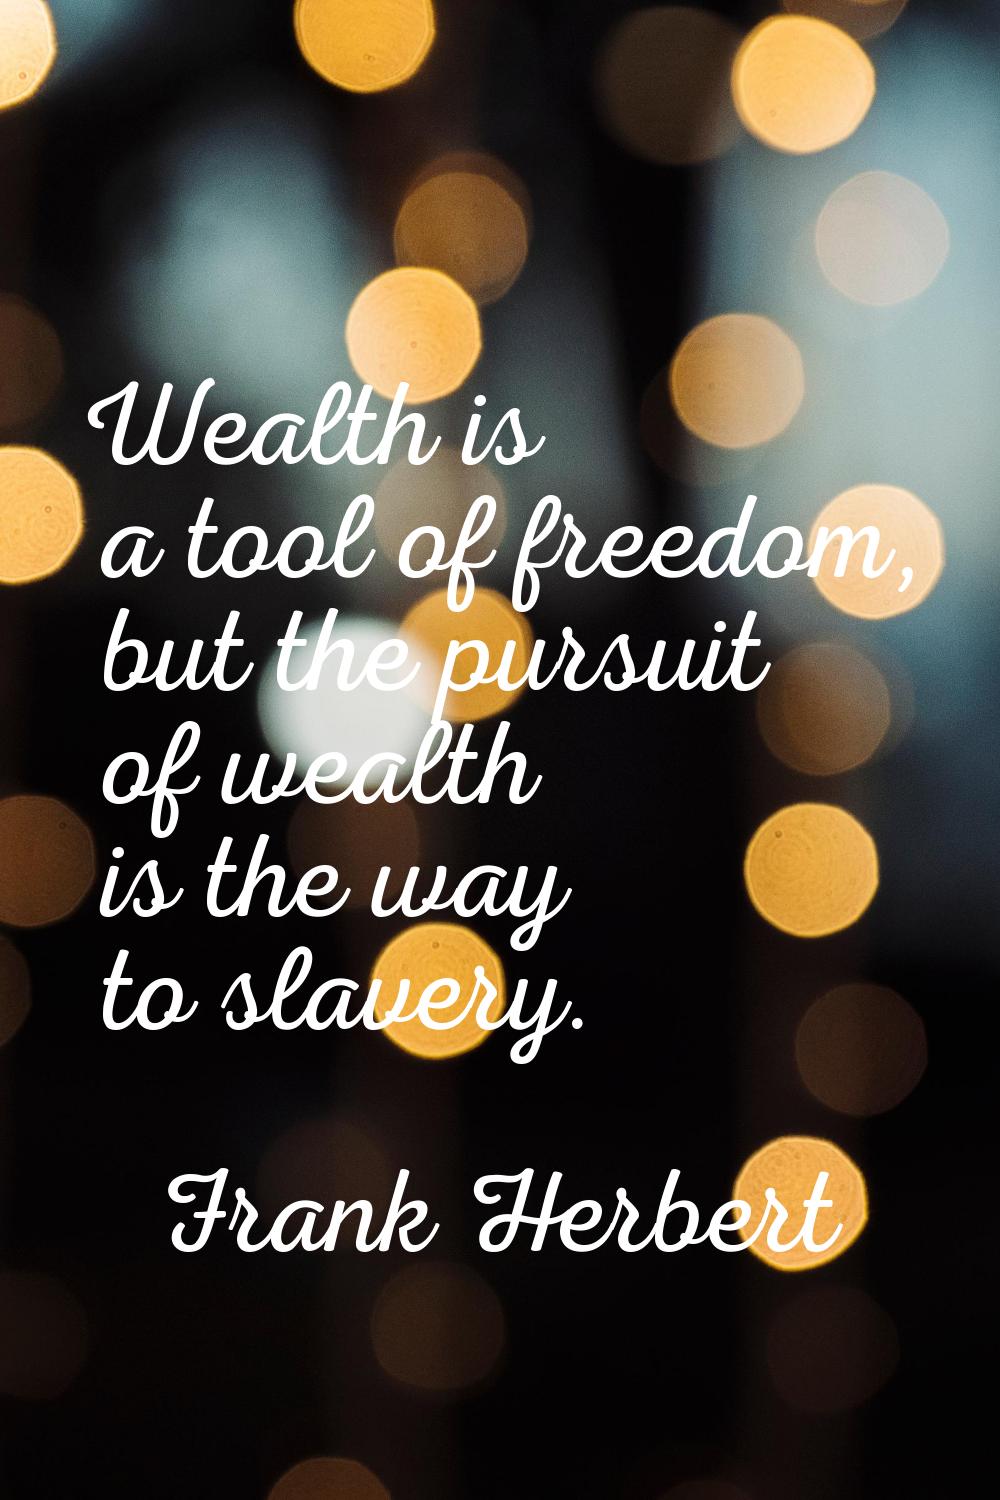 Wealth is a tool of freedom, but the pursuit of wealth is the way to slavery.